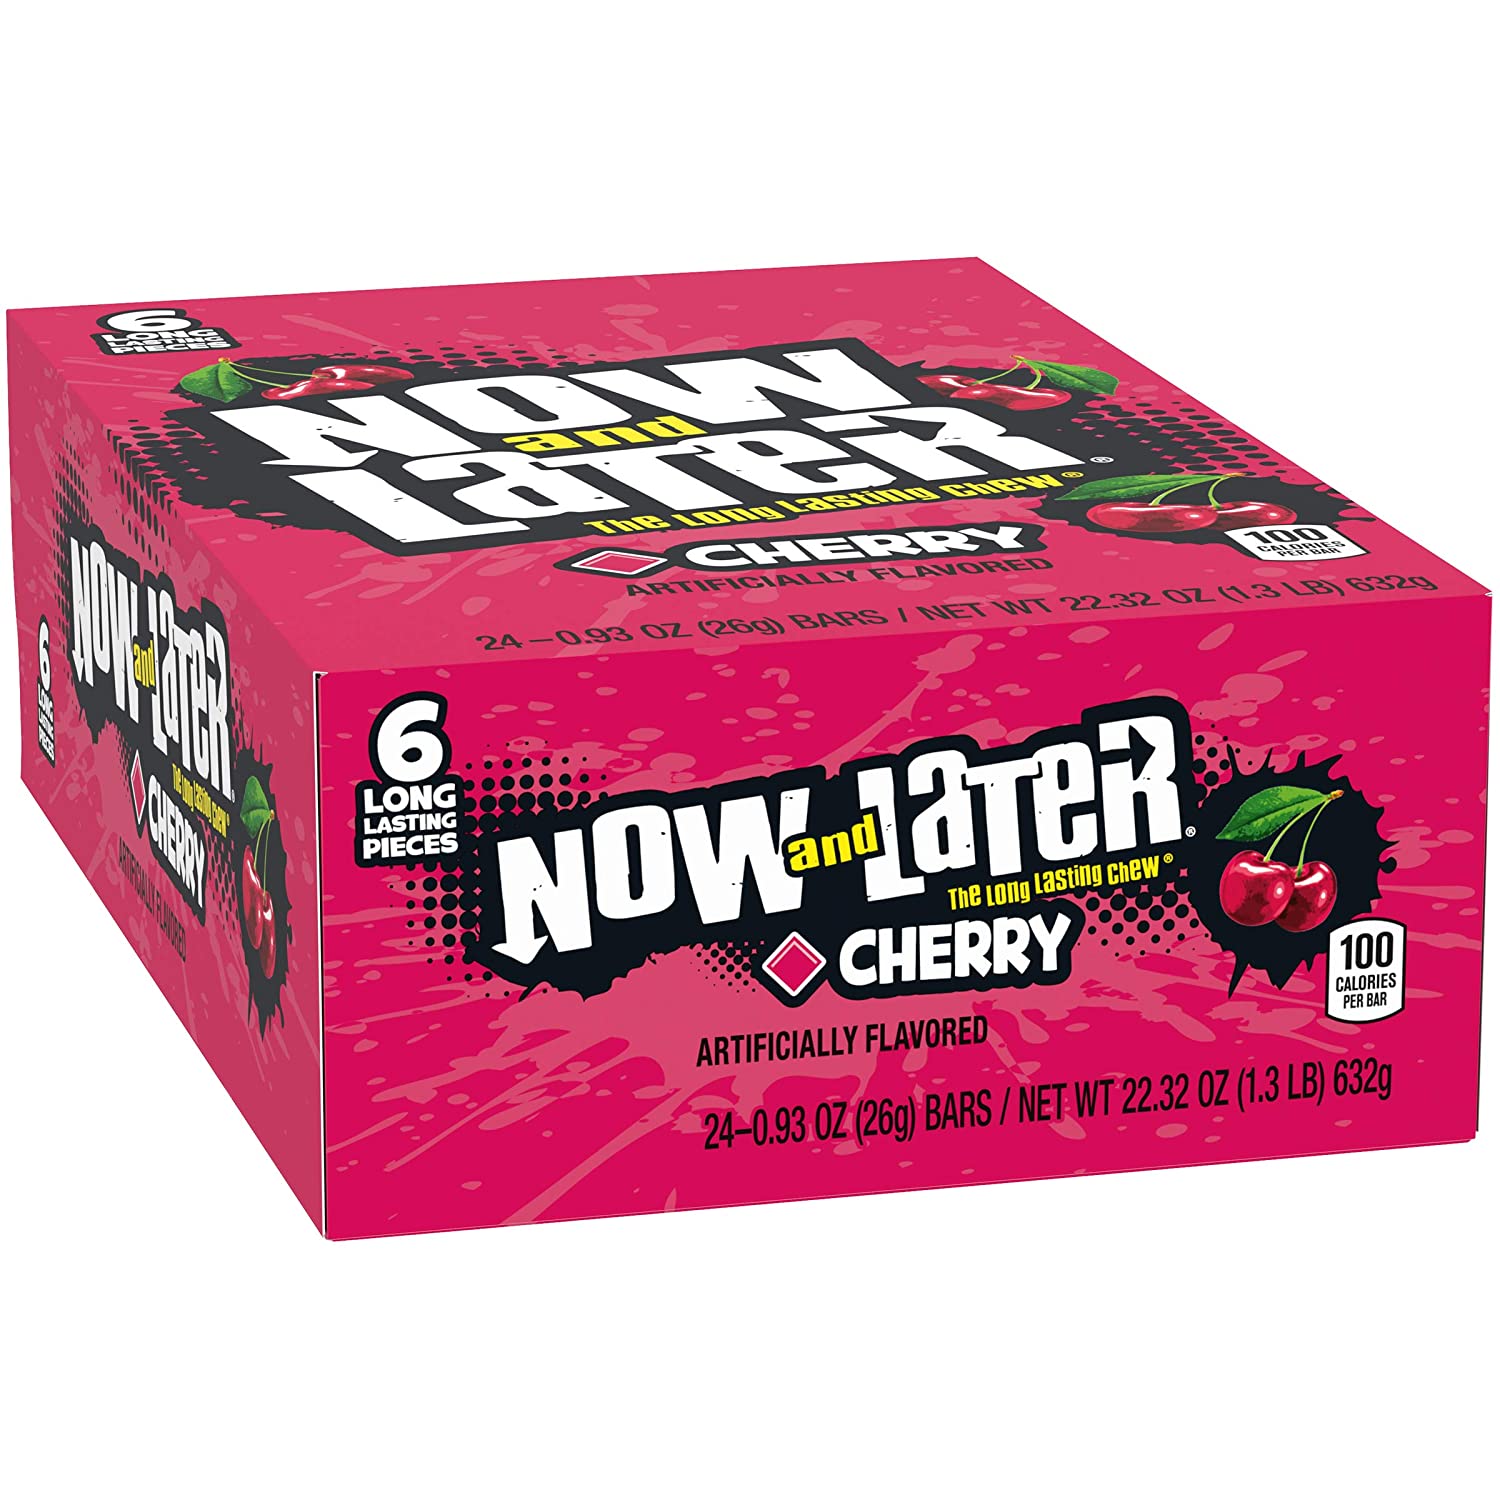 Now & Later 24-Count Original Cherry Flavored Taffy Chews Candy